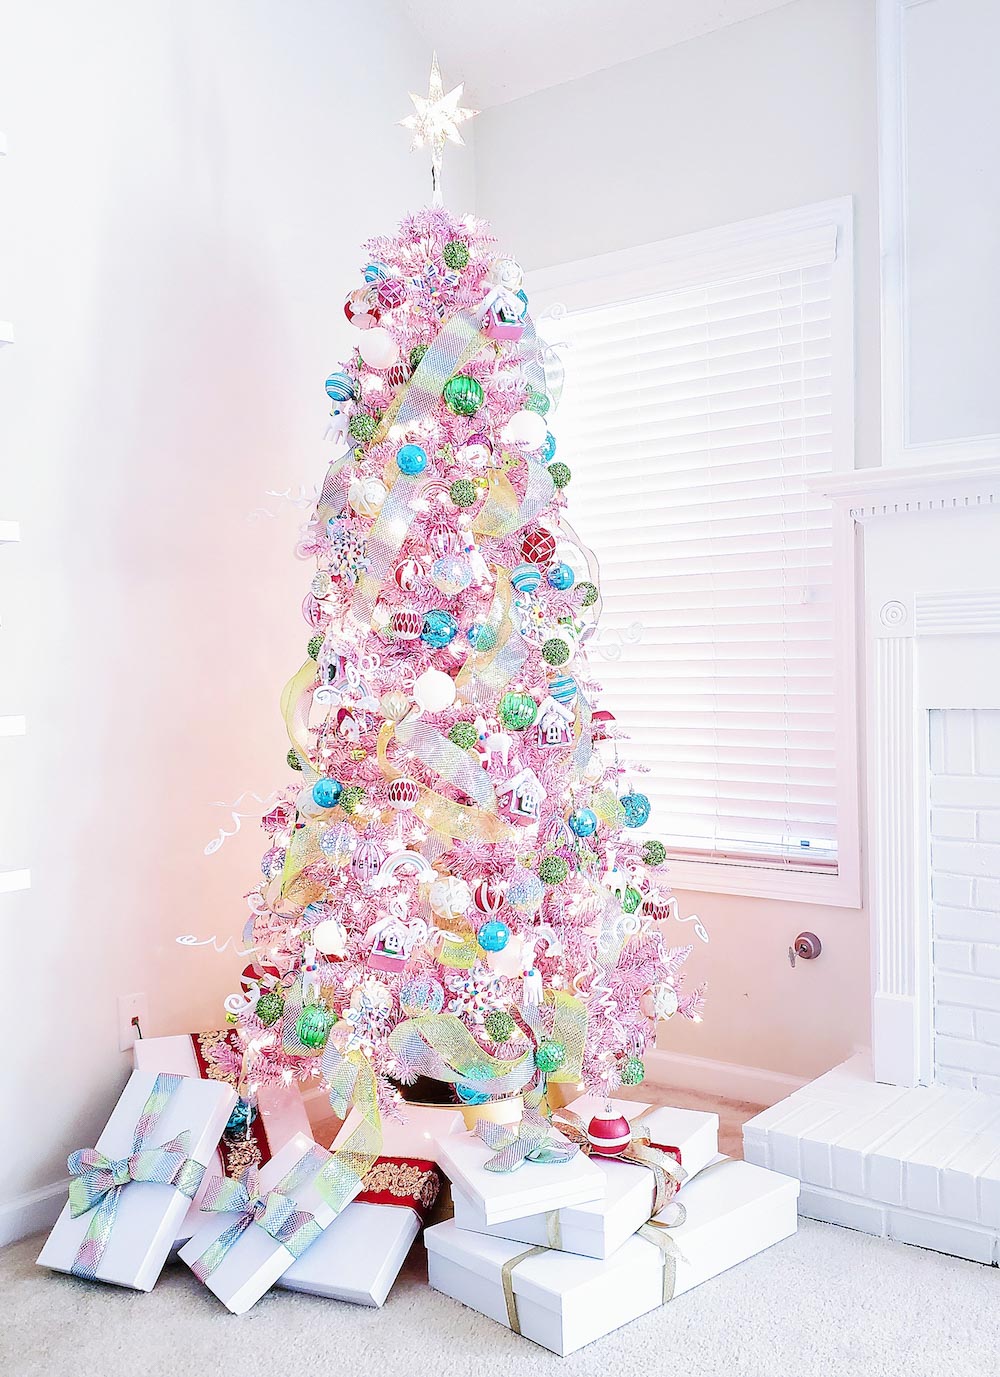 Tall colorful Christmas tree in the corner with gifts underneath